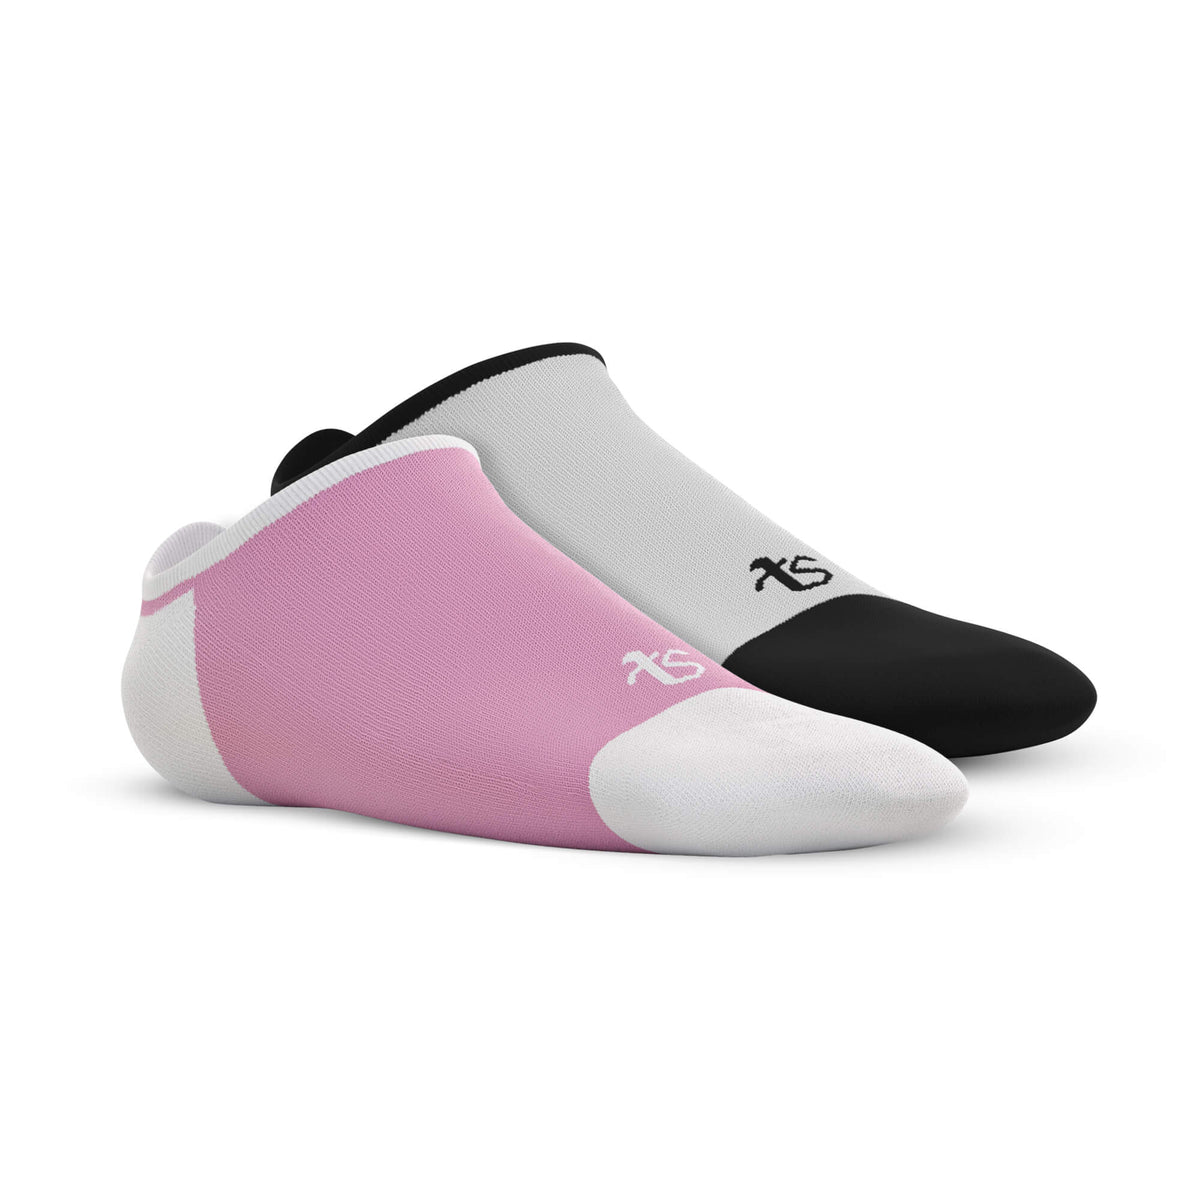 Loafer – See me – Pink, Game On – White – Set of 2